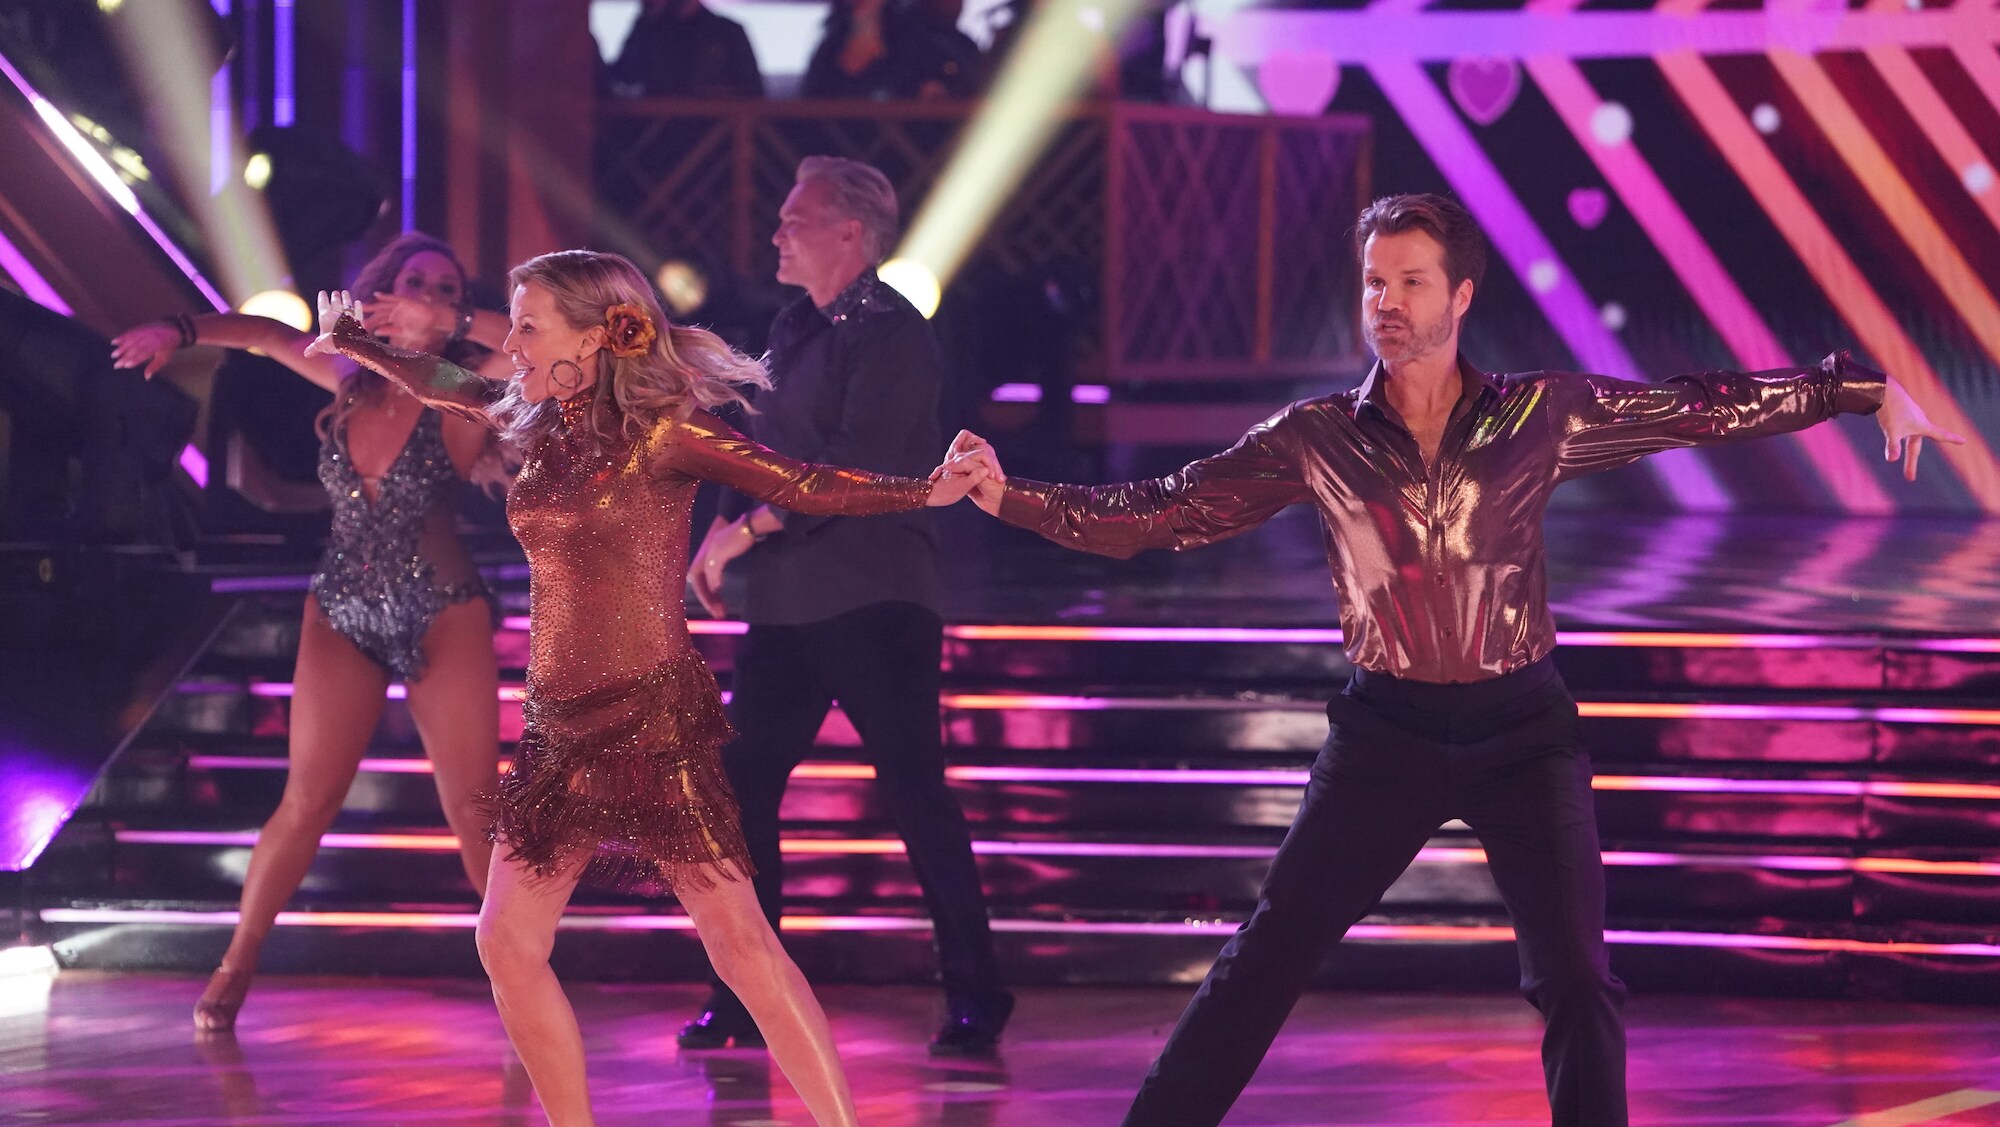 DANCING WITH THE STARS - “Finale” – The four finalists perform their final two routines in hopes of winning the mirrorball trophy. Each couple will perform a redemption dance and an unforgettable freestyle routine. A new episode of “Dancing with the Stars” will stream live MONDAY, NOV. 21 (8:00pm ET / 5:00pm PT), on Disney+. (ABC/Eric McCandless) CHERYL LADD, LOUIS VAN AMSTEL